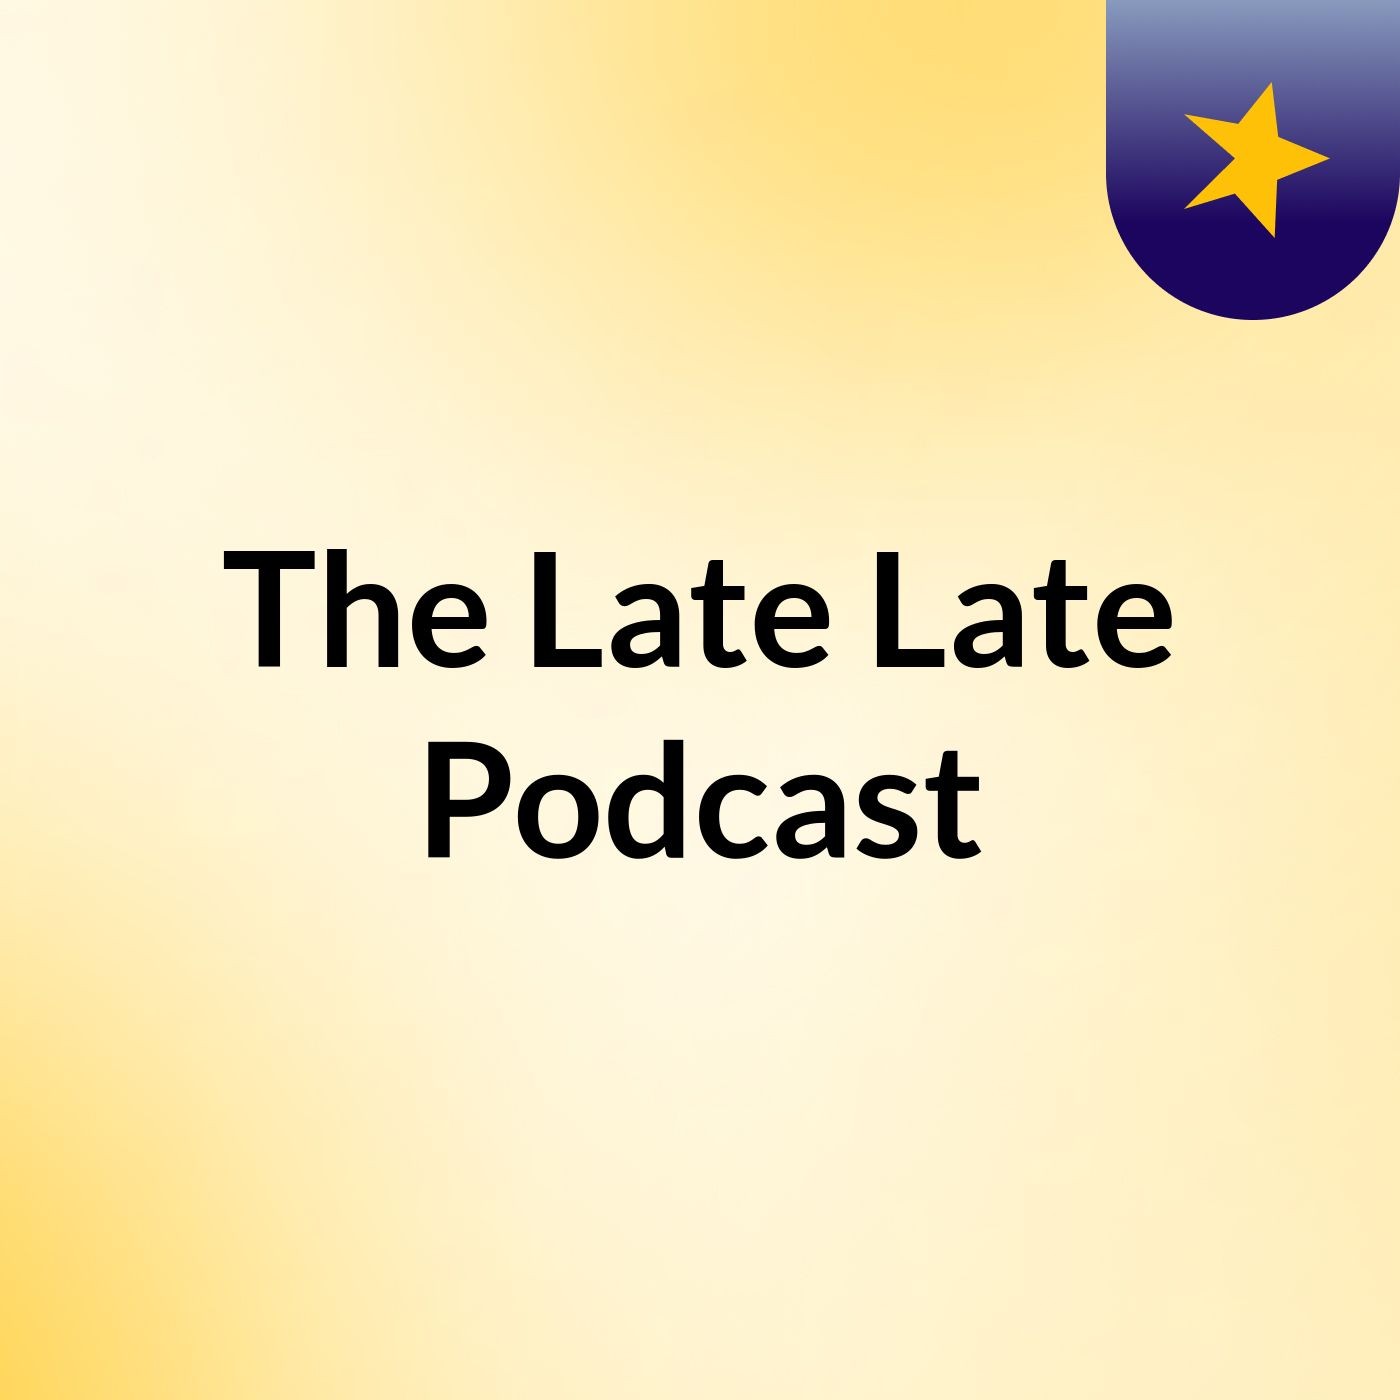 The Late Late Podcast